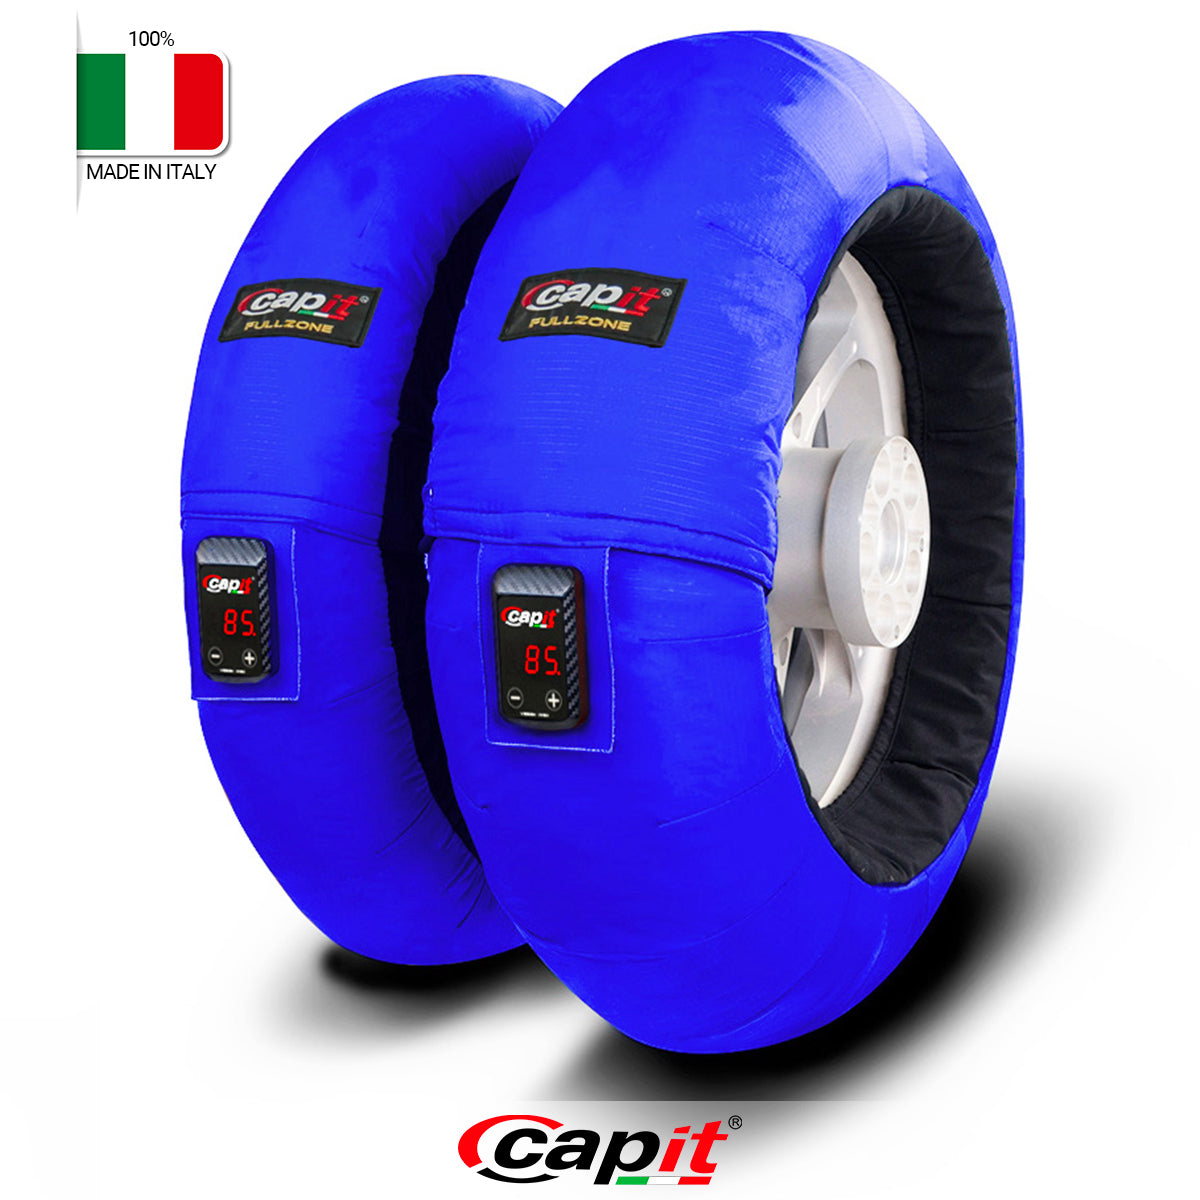 Capit Full ZONE motorcycle Tire warmers